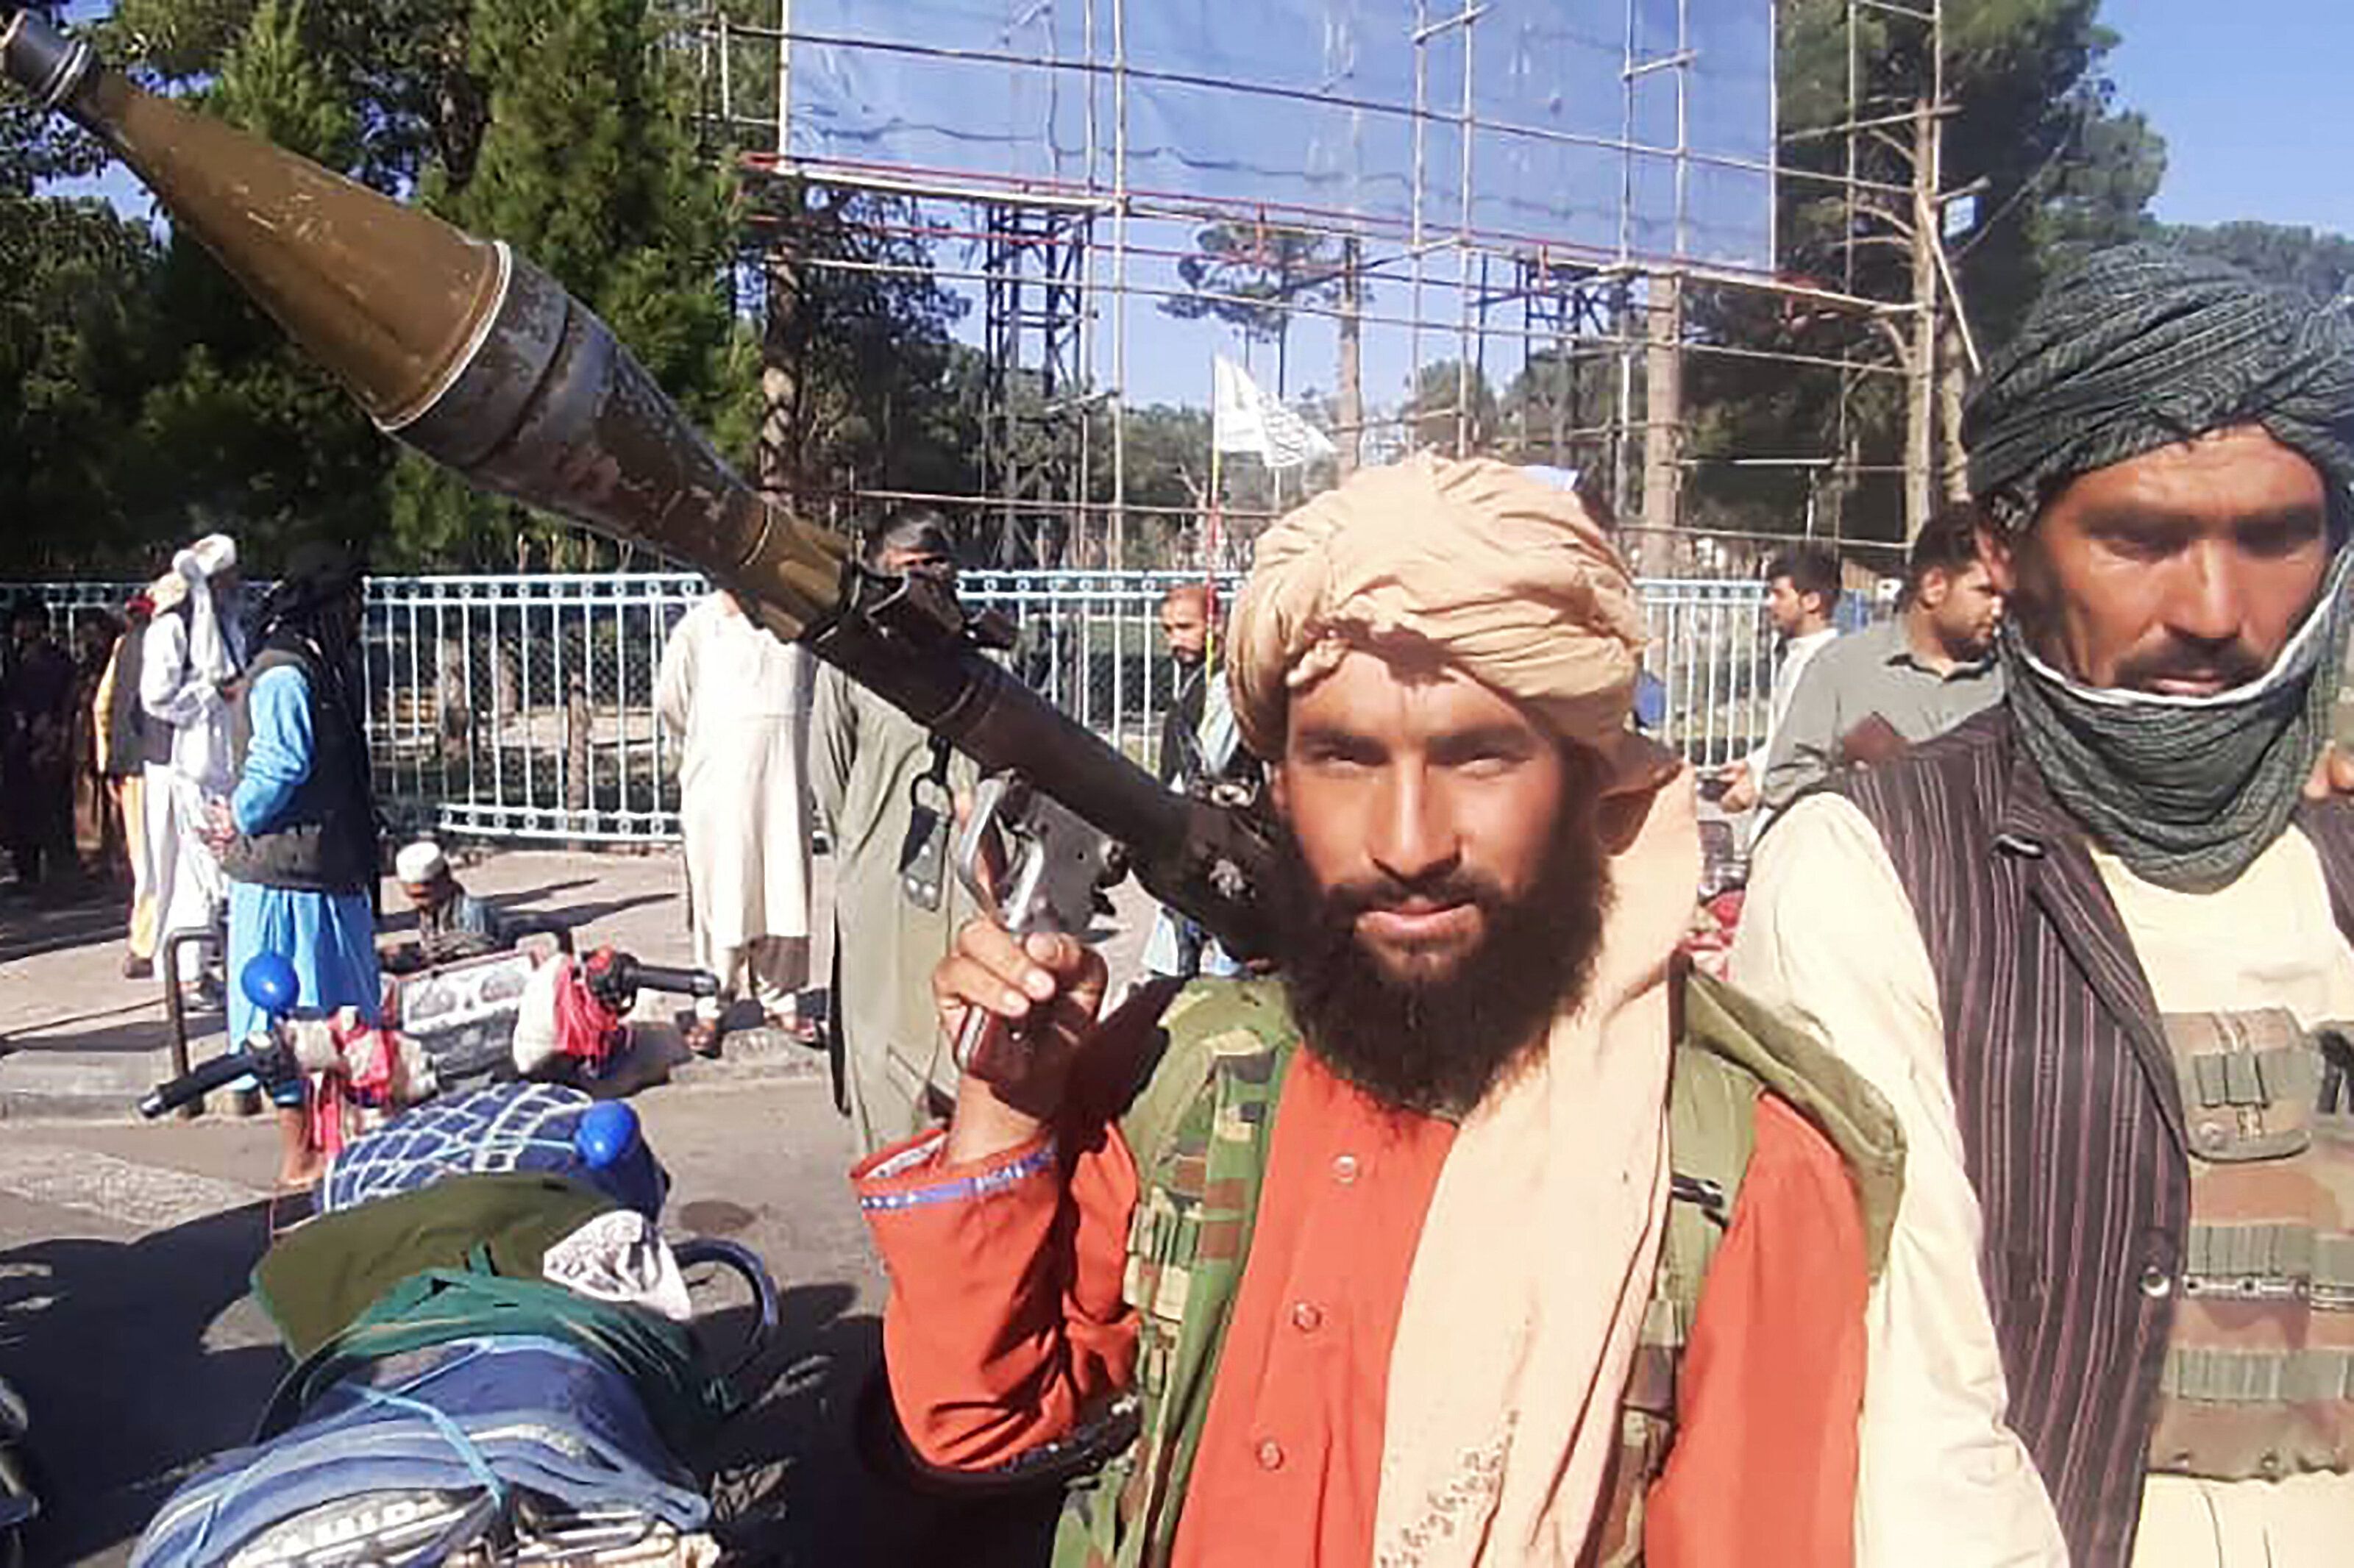 A Taliban fighter holds a rocket-propelled grenadea long the roadside in Herat, Afghanistan's third biggest city, on Aug. 12.